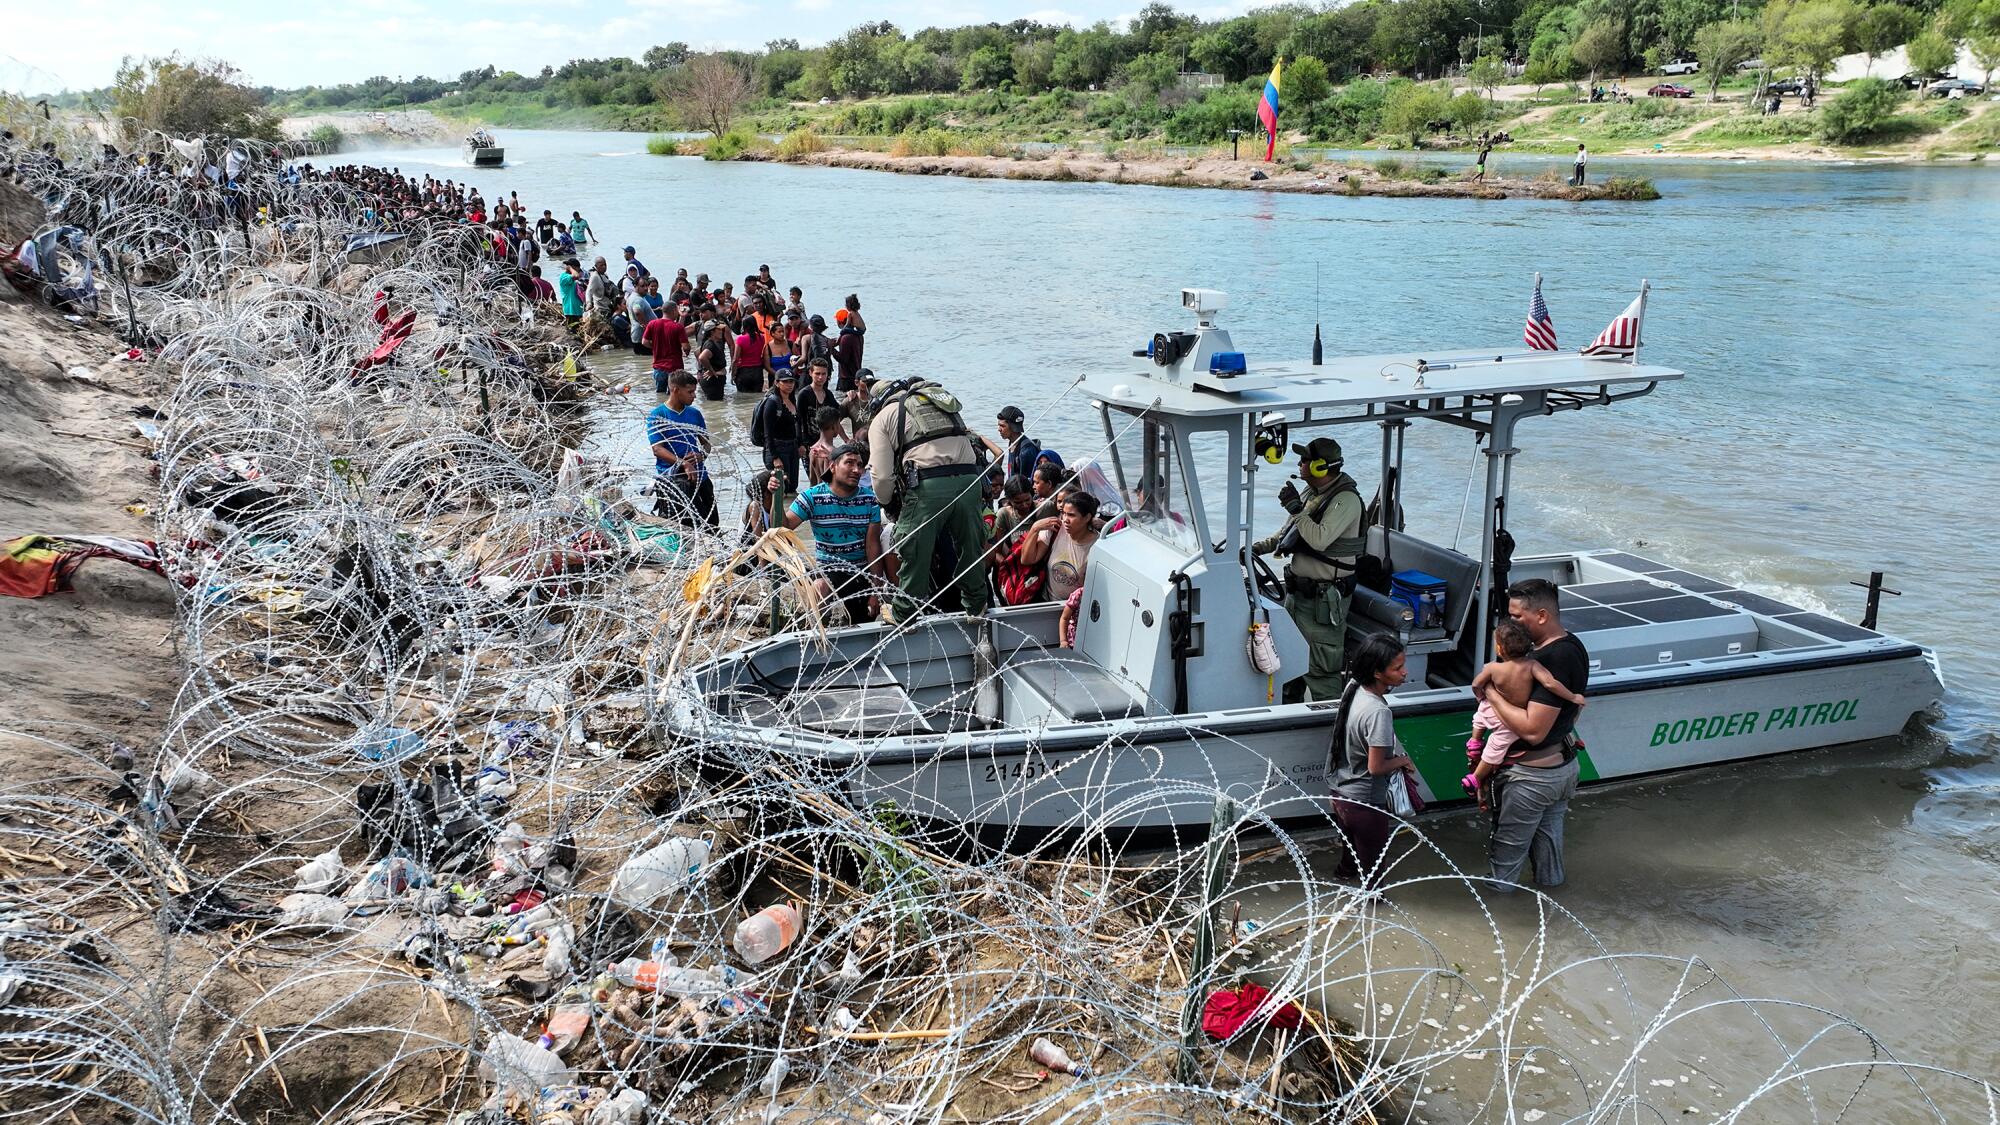 A Border Patrol boat sits next to coils of razor wire as a long line of people stand in the river.